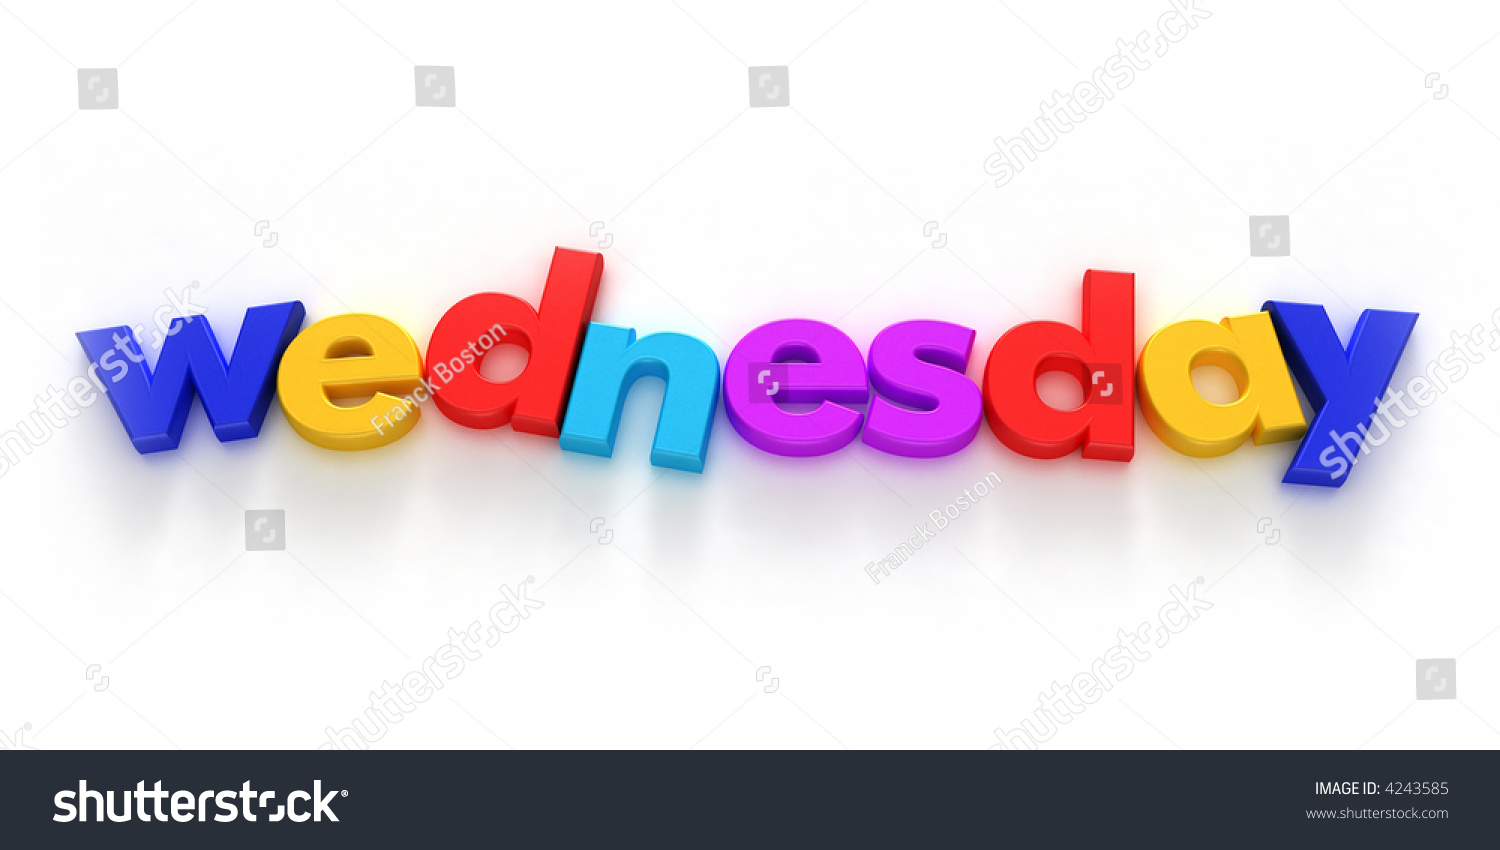 Wednesday Word Formed Colorful Letter Magnets Stock Photo 4243585 ...